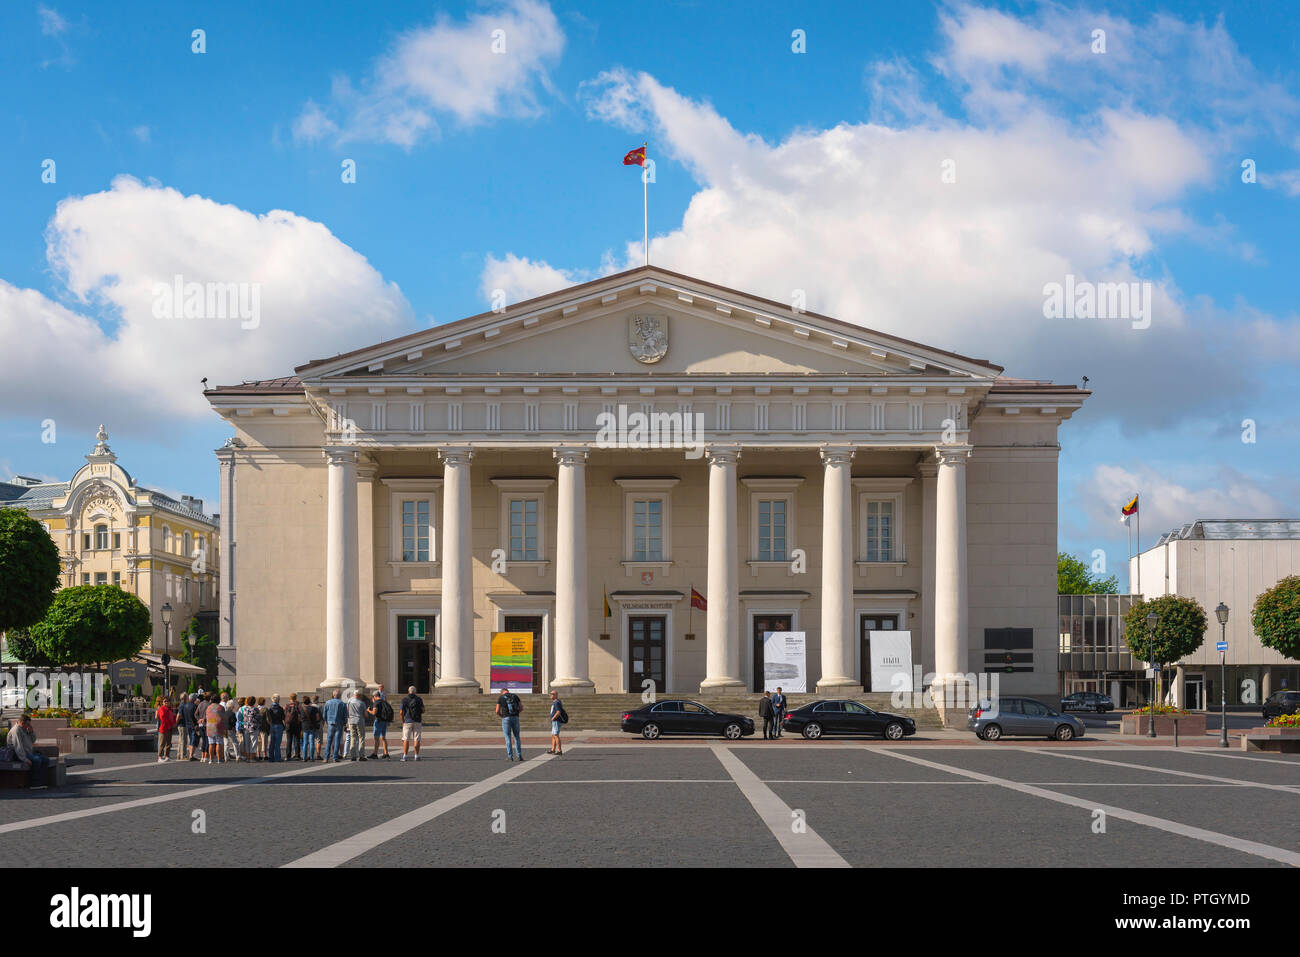 Vilnius Town Hall, view of the neoclassical style Town Hall building (1799) in Vilnius Town Hall Square (Rotuses aikste), Lithuania. Stock Photo